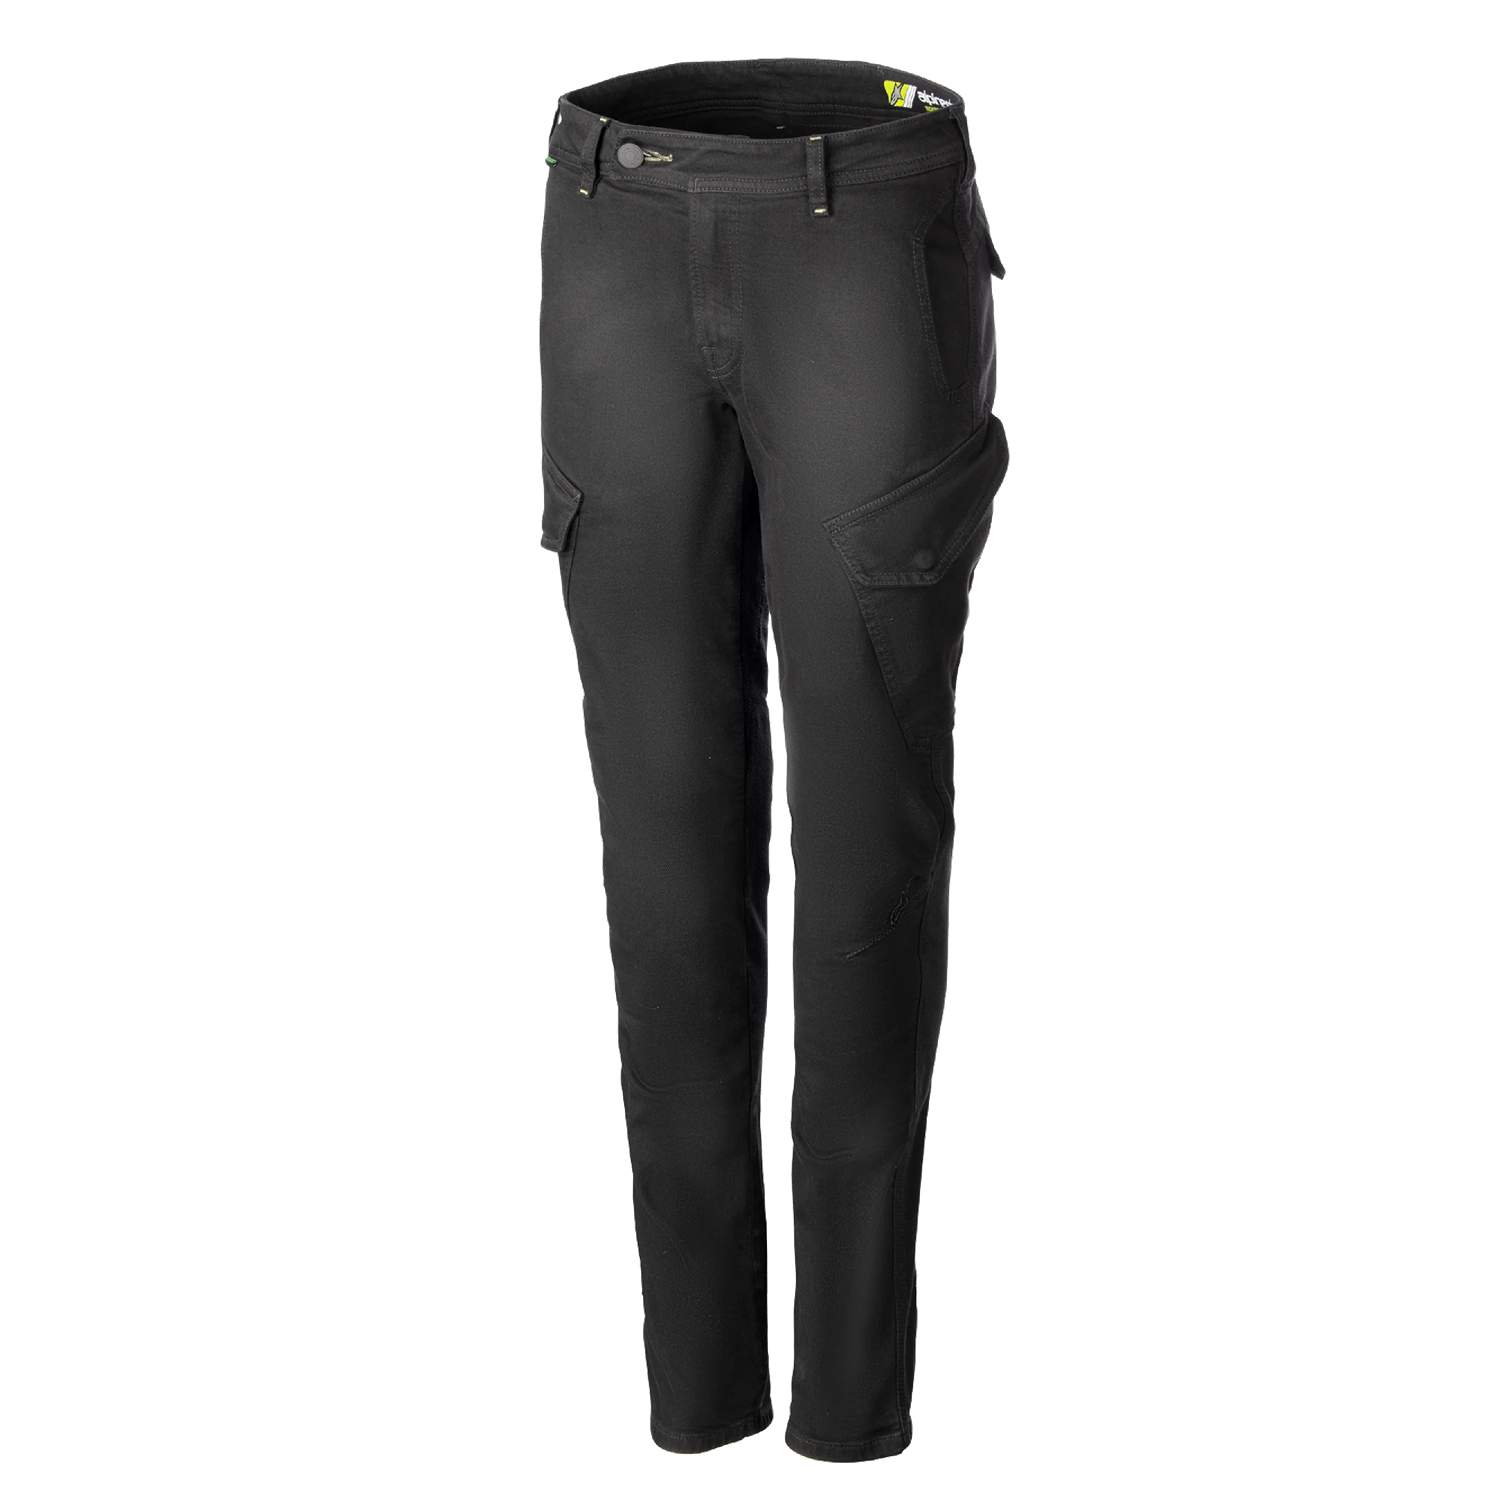 Image of Alpinestars Caliber Women's Tech Riding Pants Anthracite Taille 31